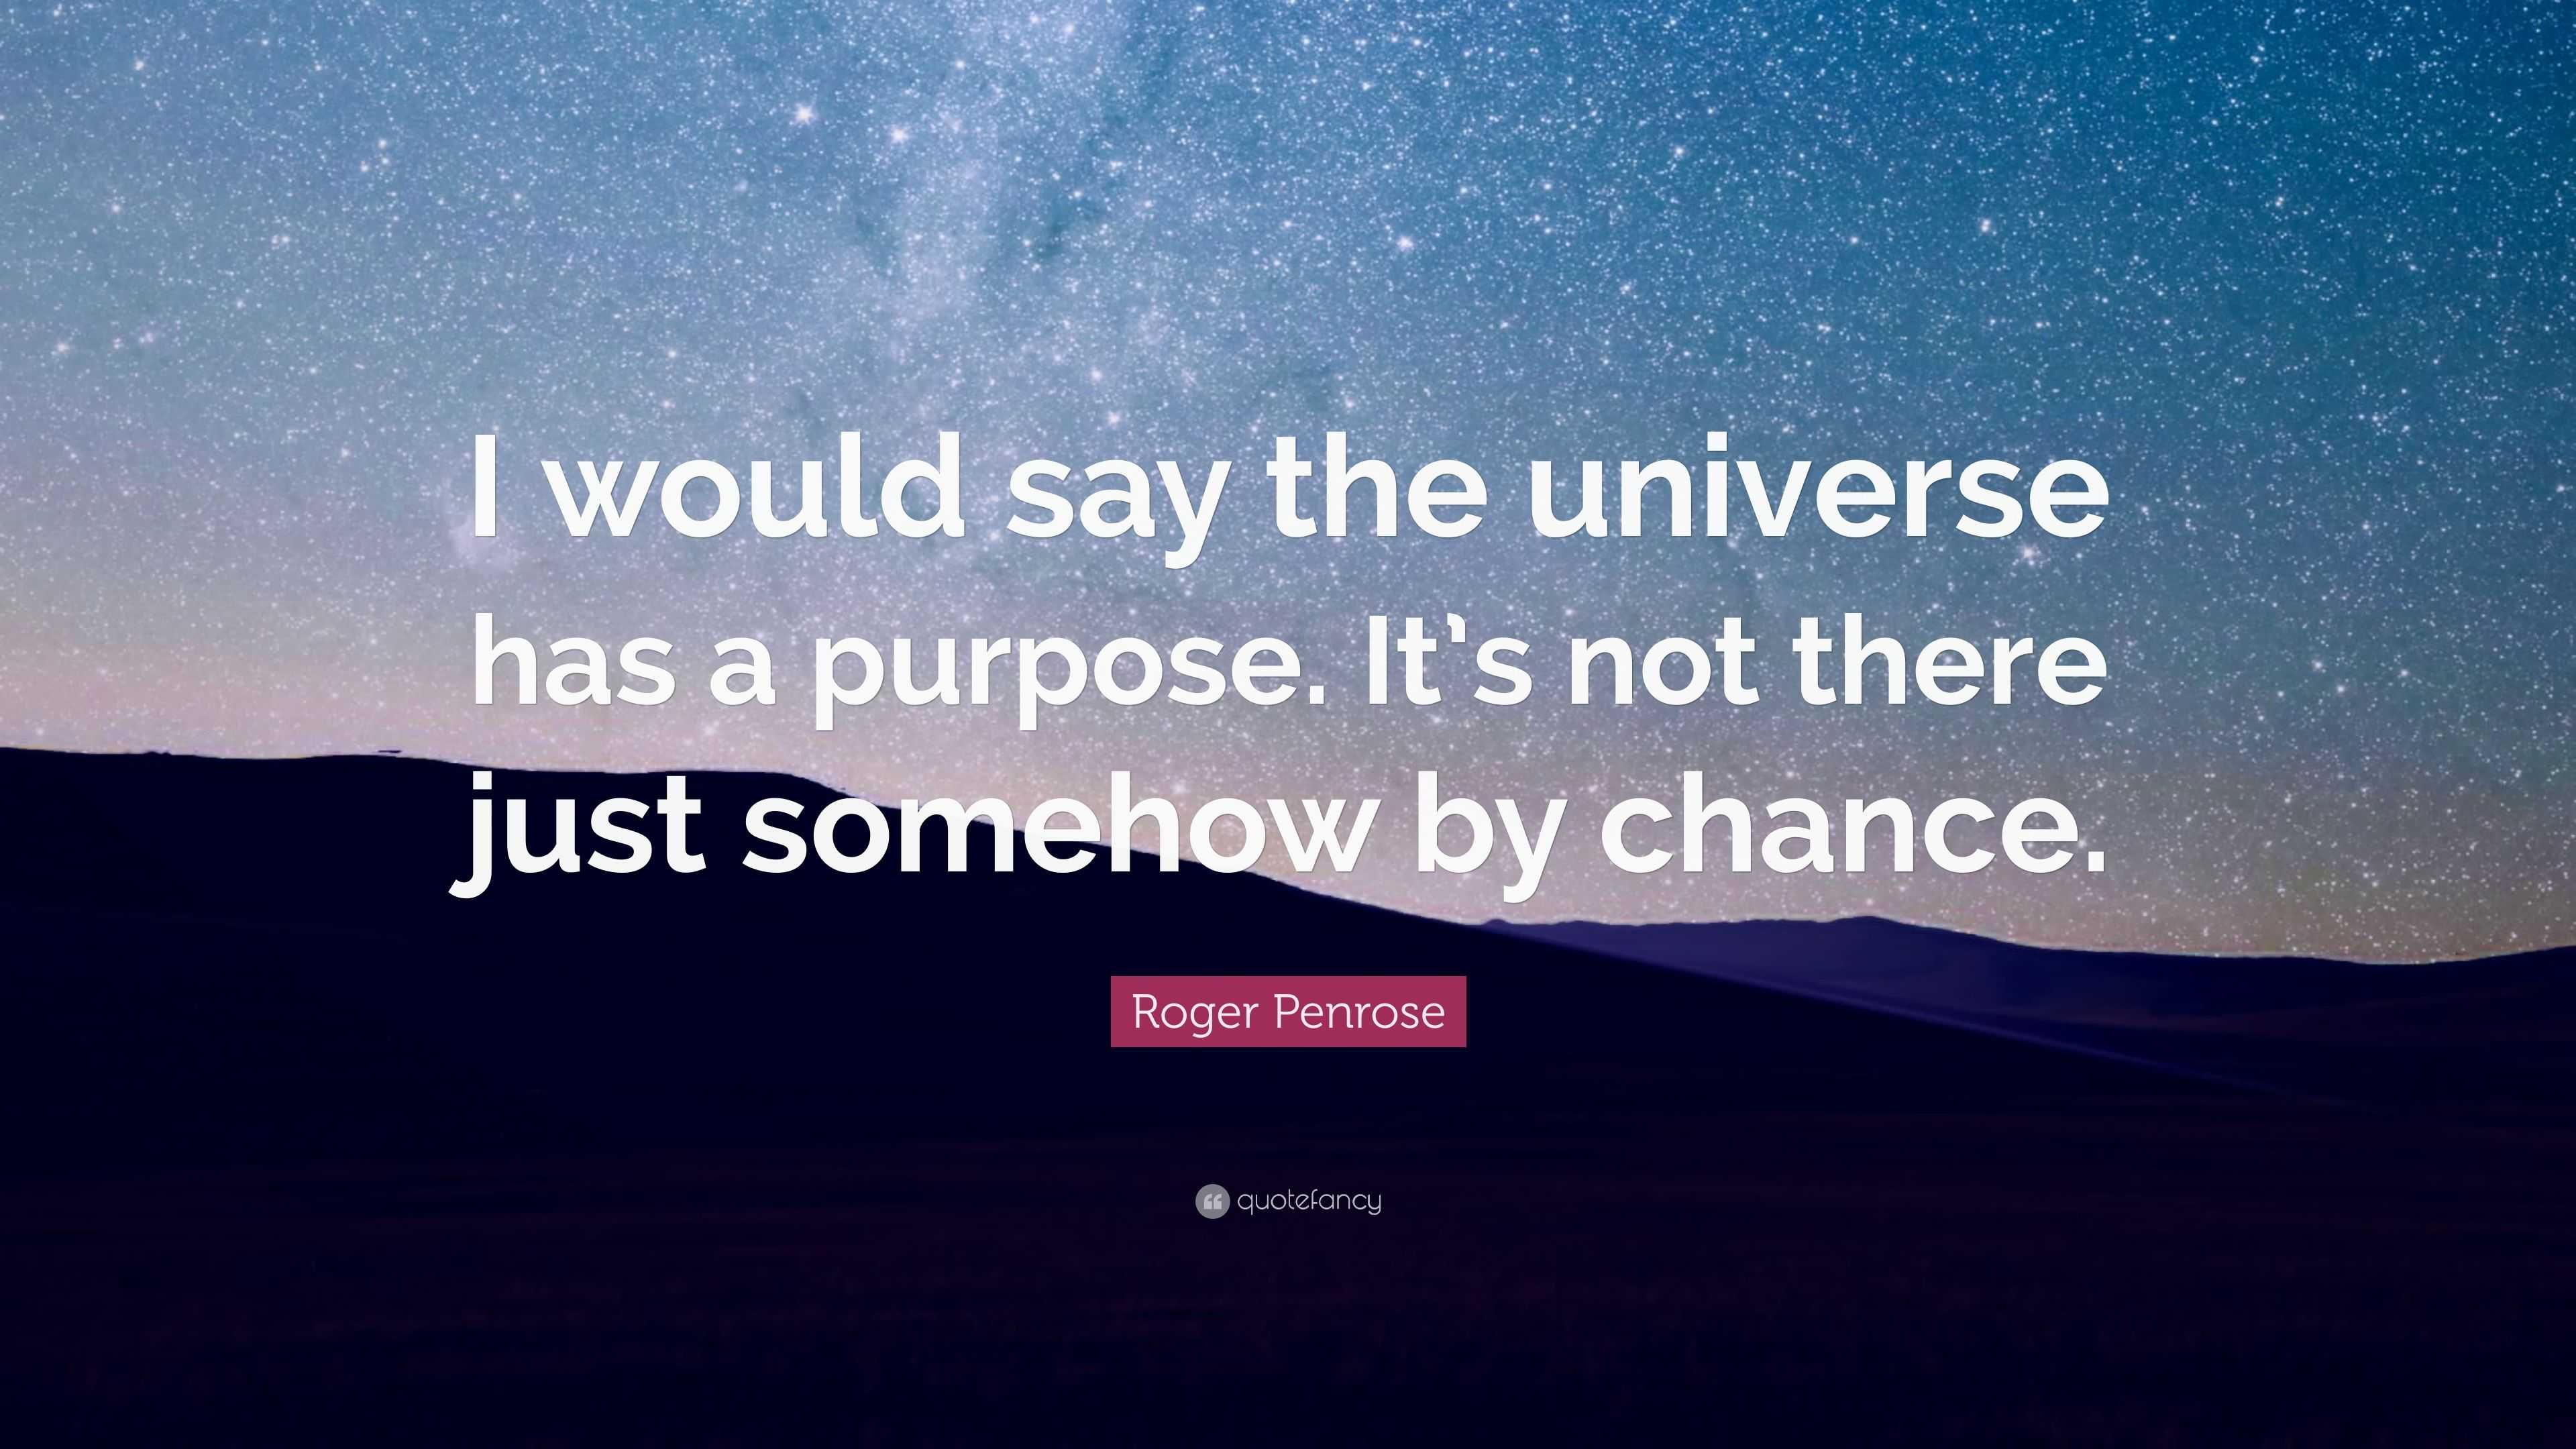 Roger Penrose Quote: “I would say the universe has a purpose. It's not there just somehow